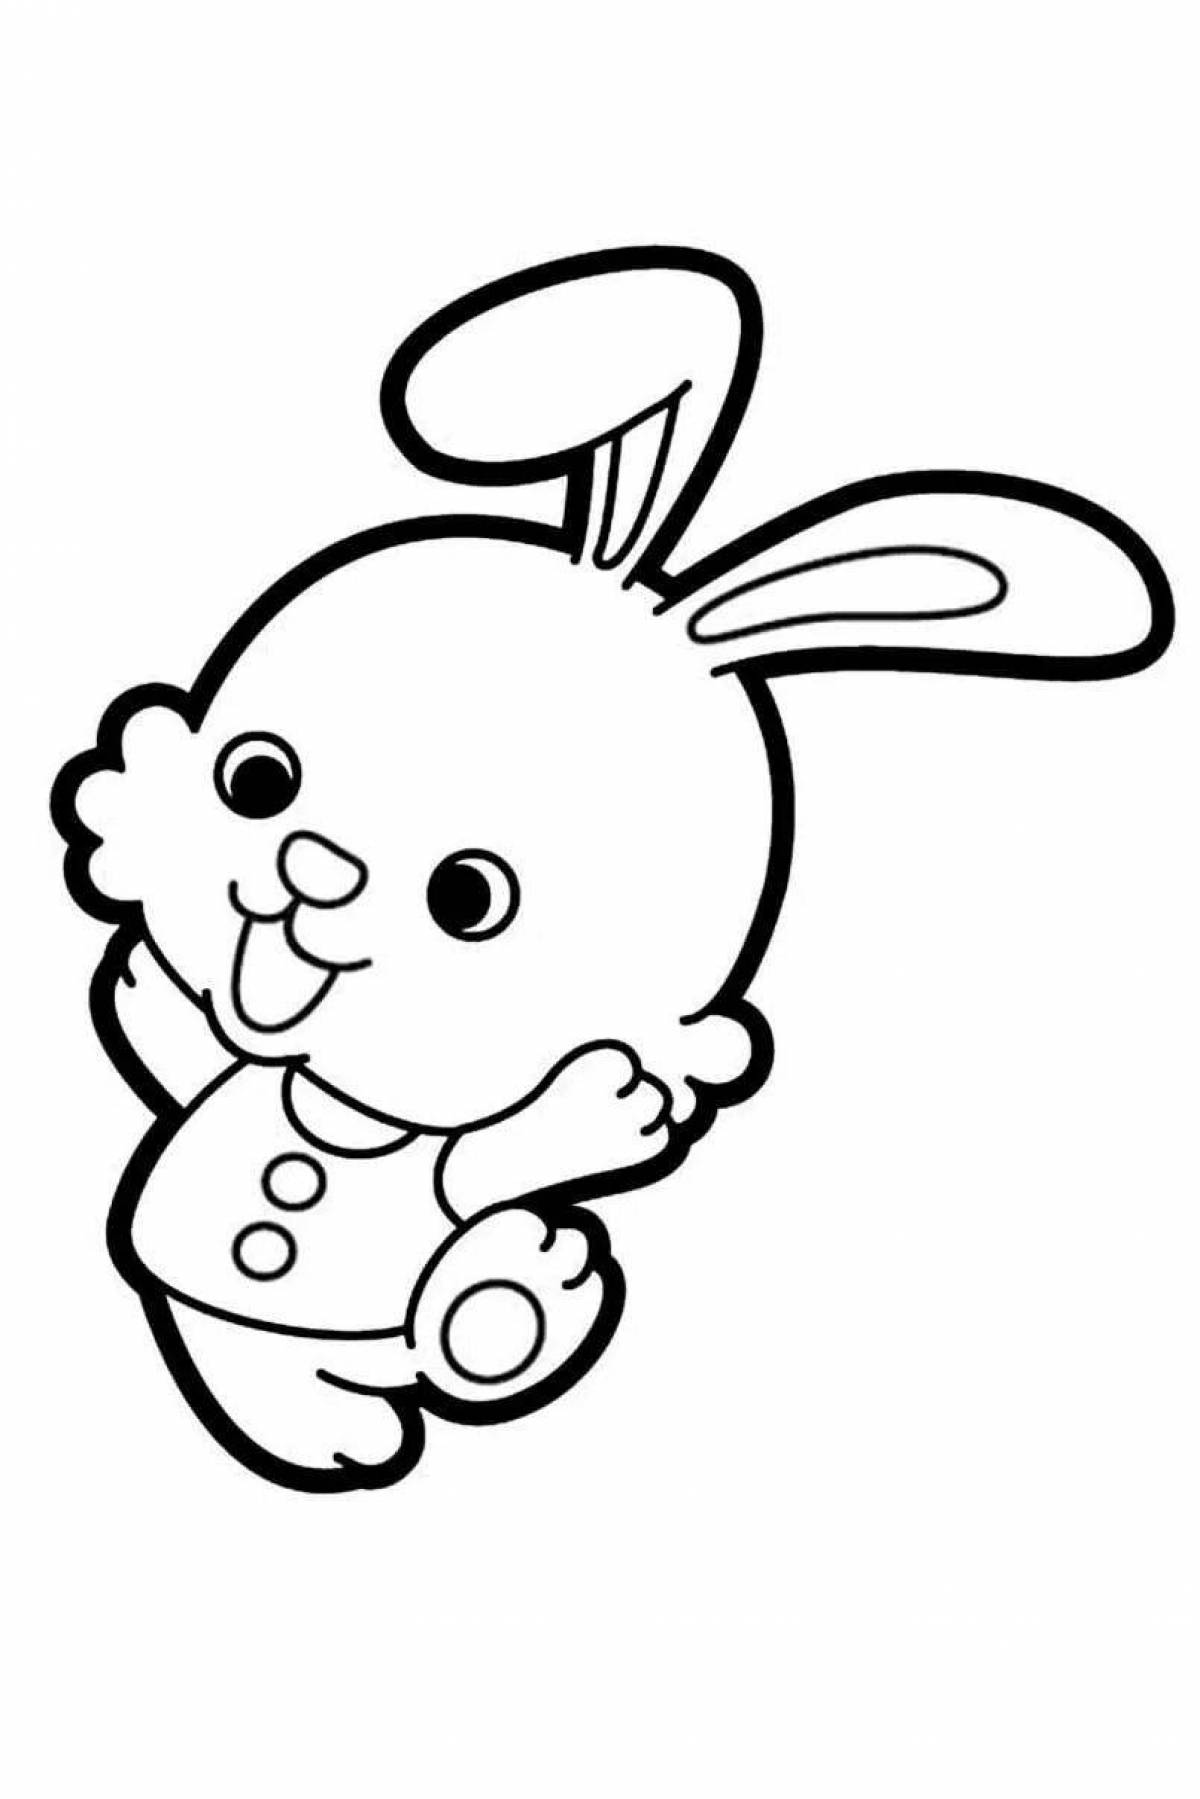 Adorable bunny coloring picture for kids